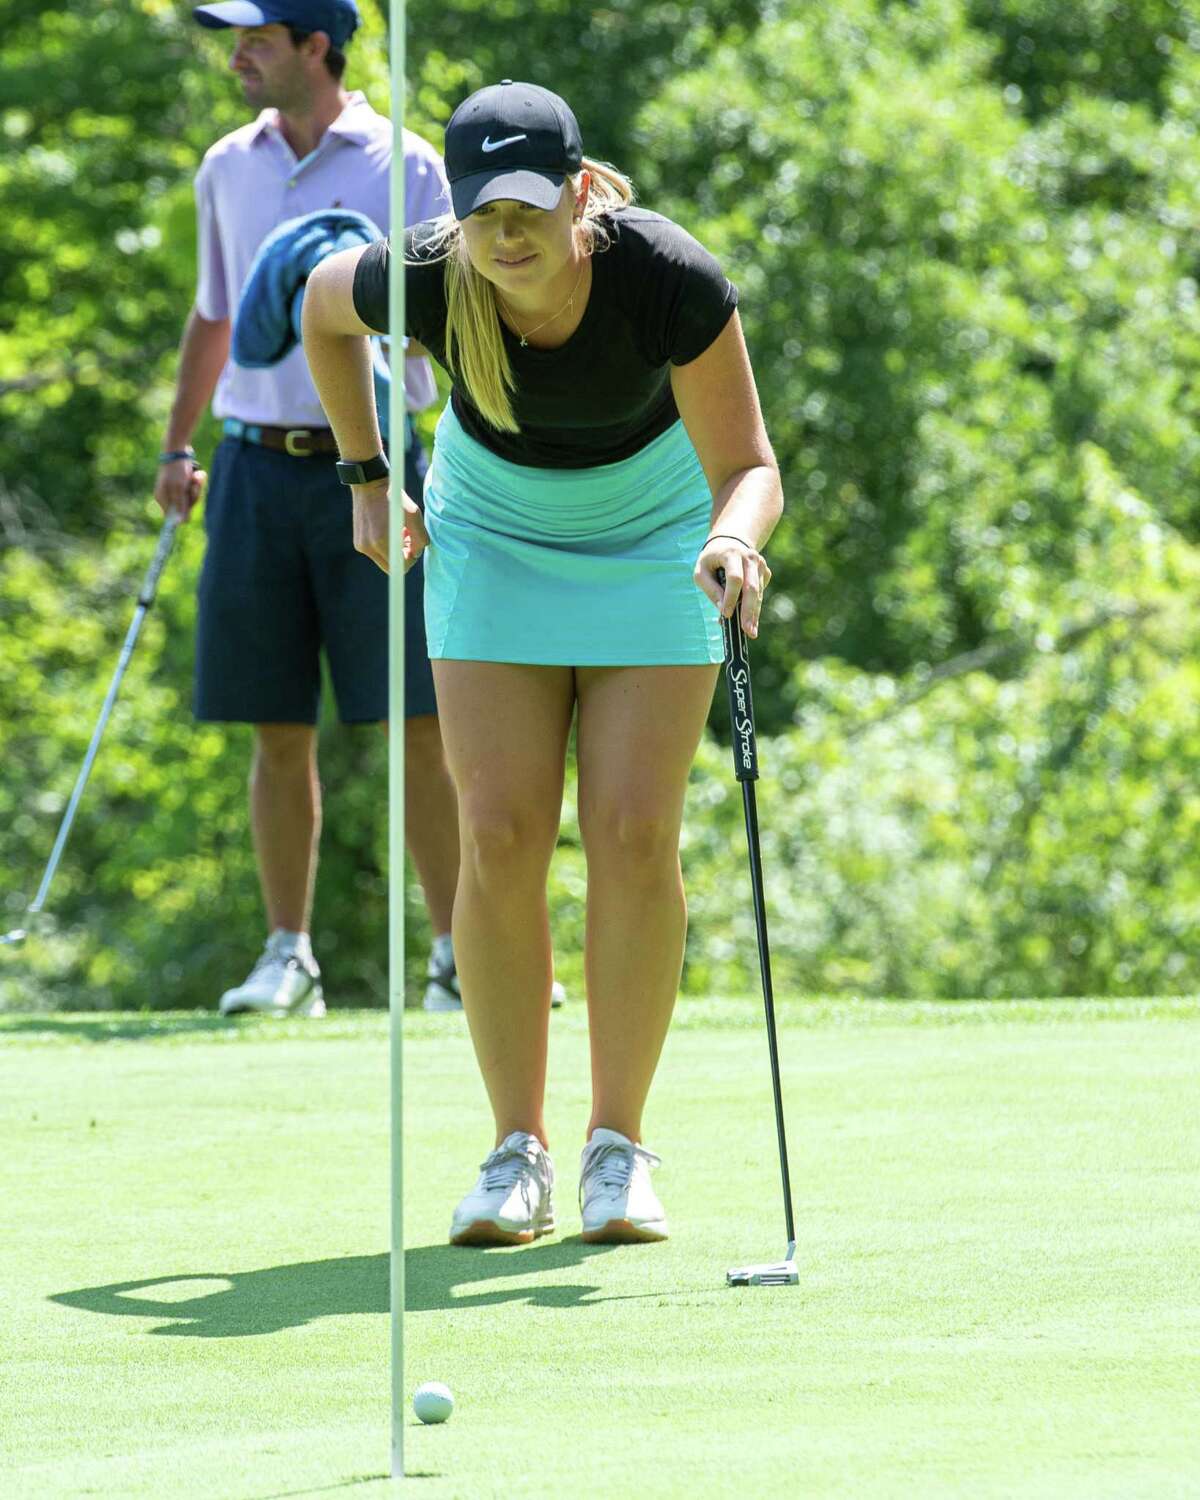 Kelly Whaley lines up a putt during the CDPHP Pro-Am featuring Symetra Tour players at Capital Hills Golf Course in Albany, NY, on Friday, Aug. 28, 2020 (Jim Franco/special to the Times Union.)